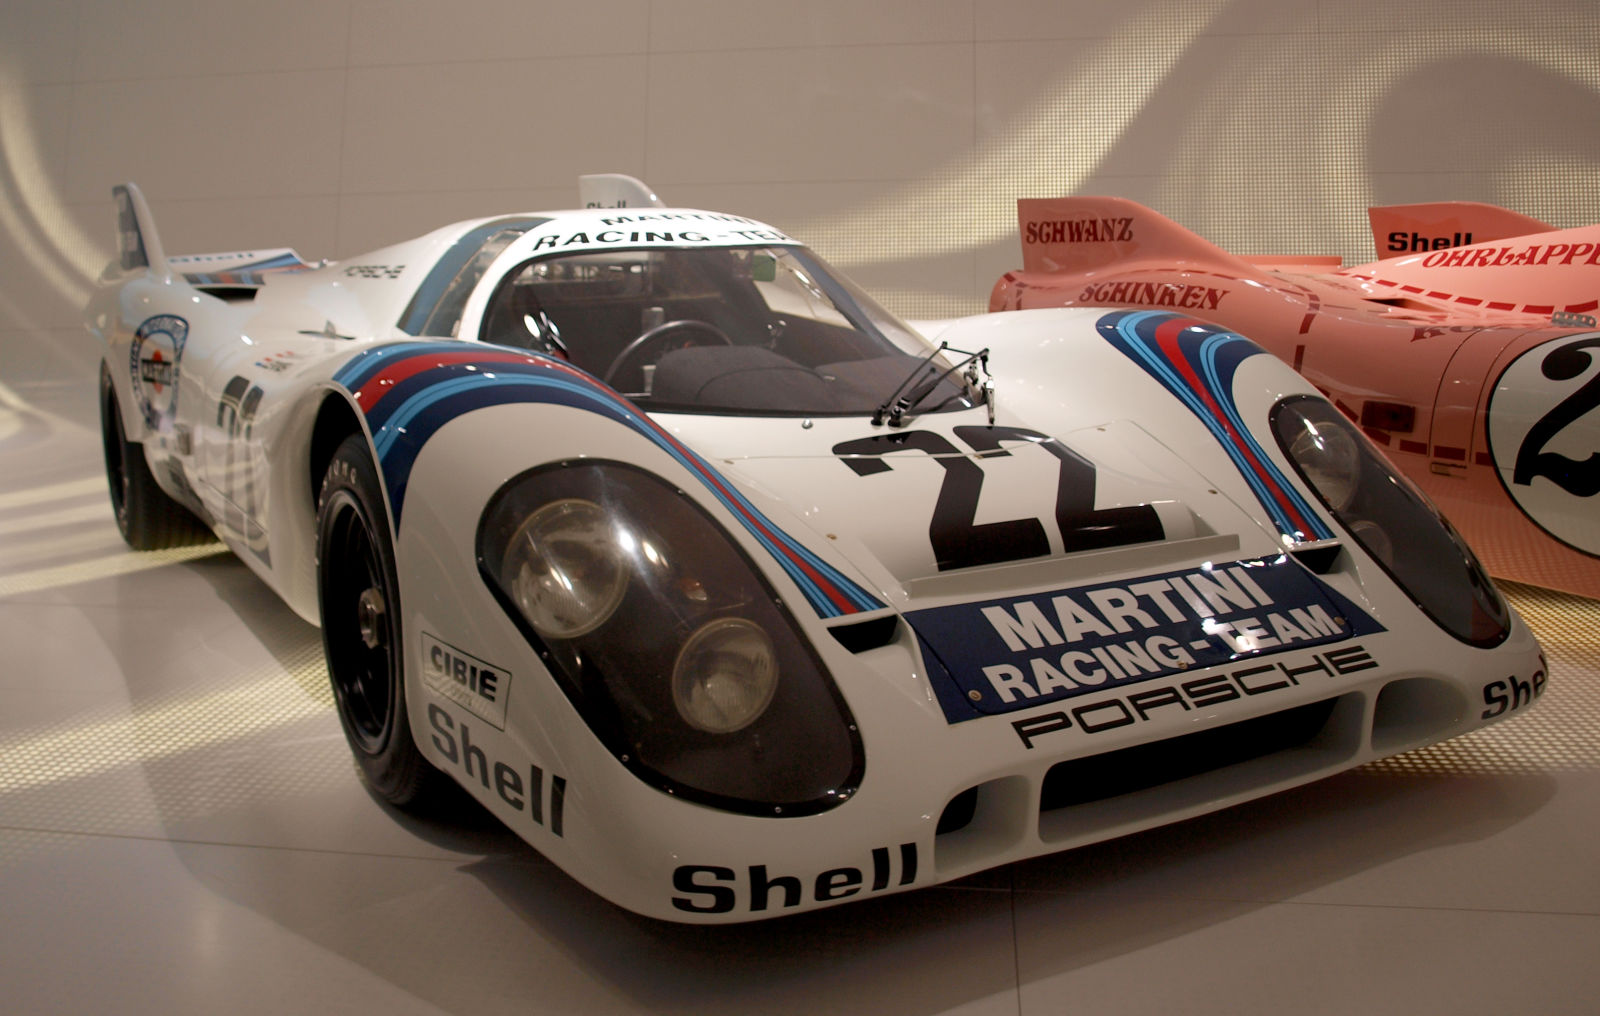 1971 LeMans winner that also held the lap record until 2010